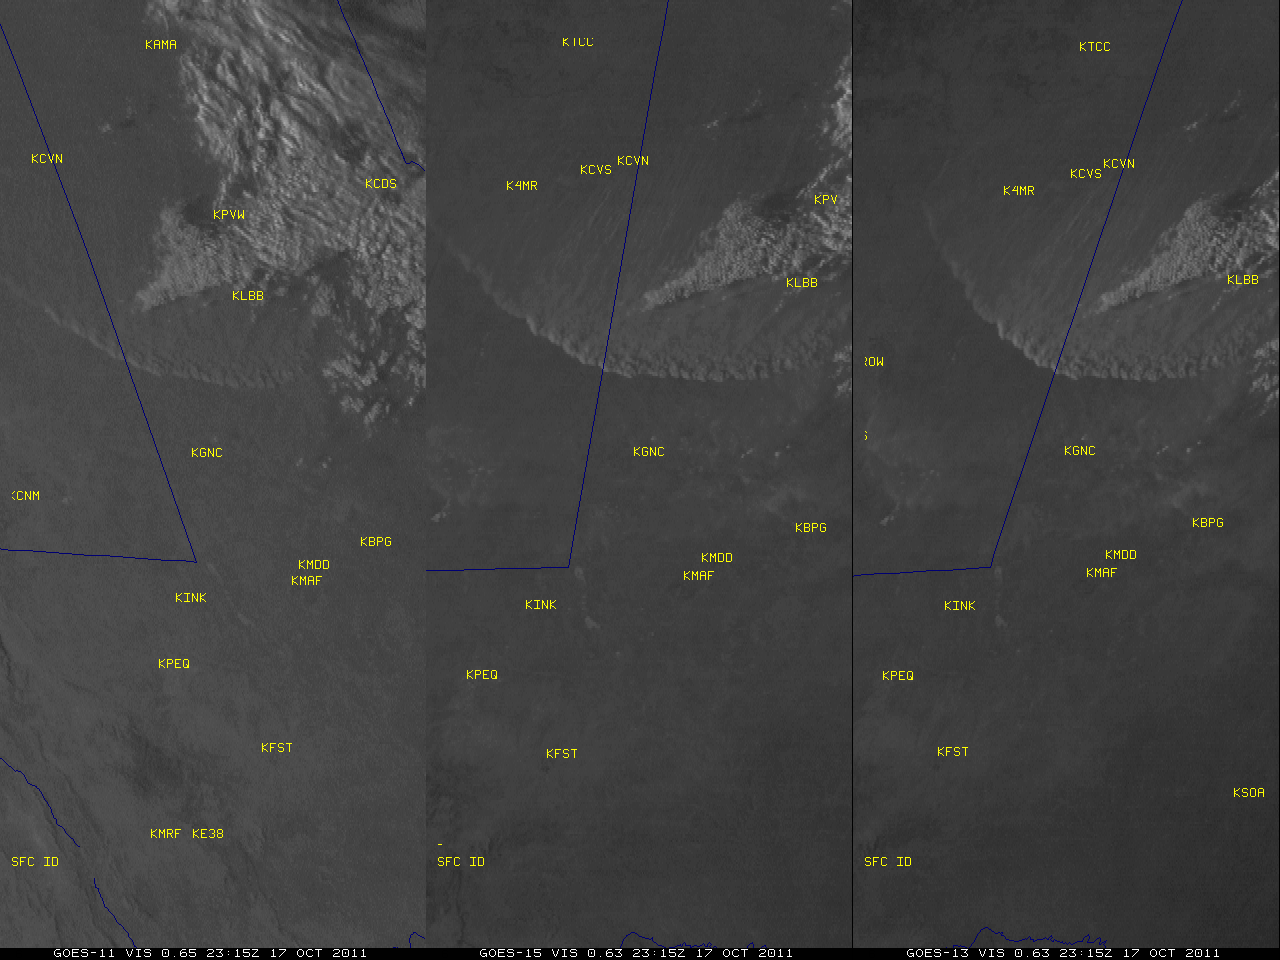 GOES-11, GOES-15, and GOES-13 visible channel images (click image to play animation)